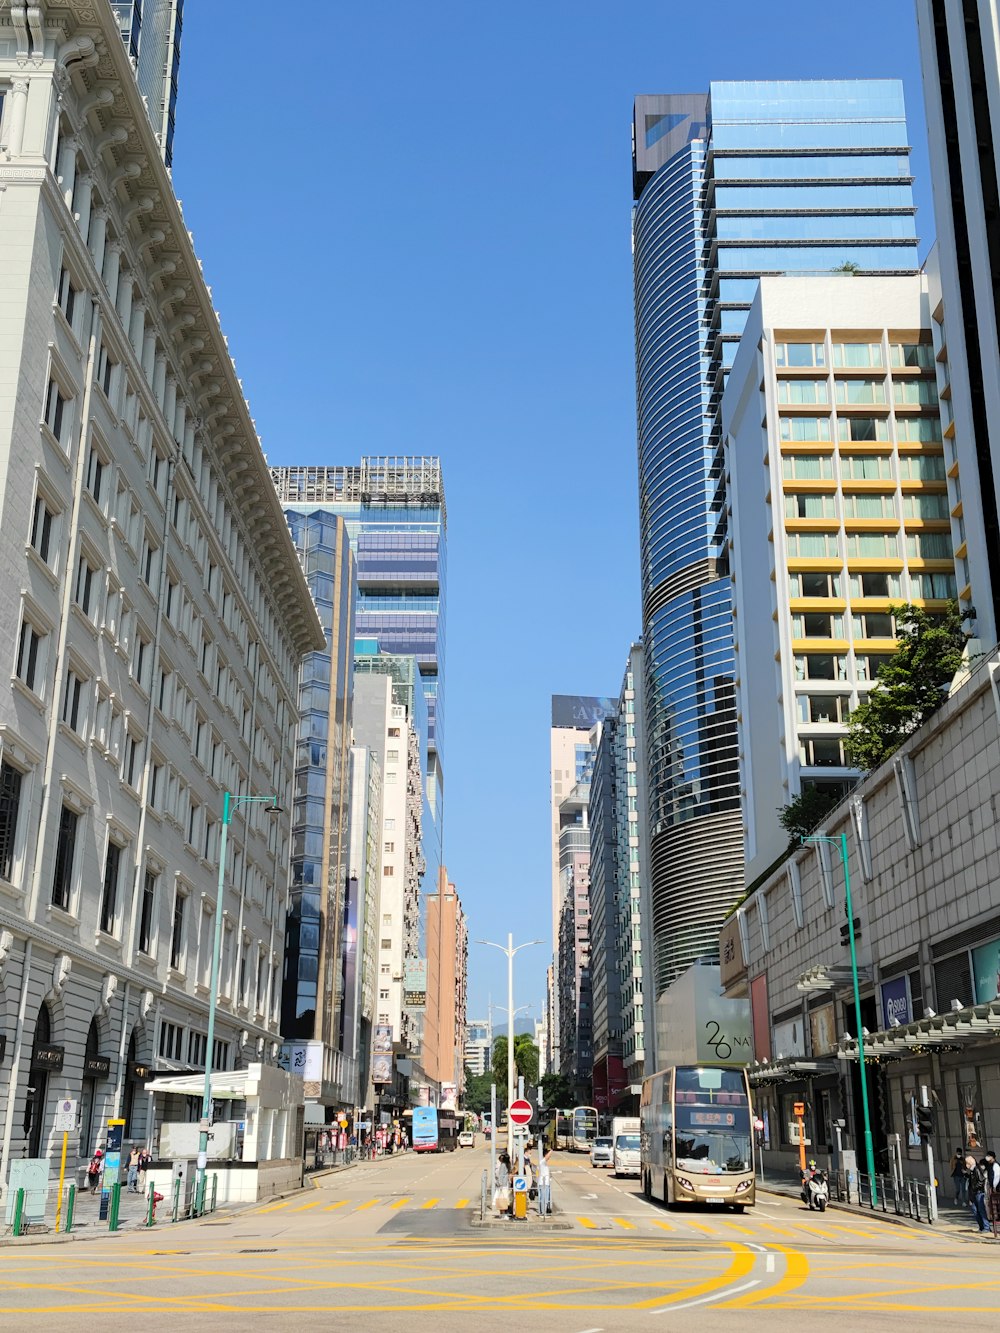 a city street filled with tall buildings and traffic